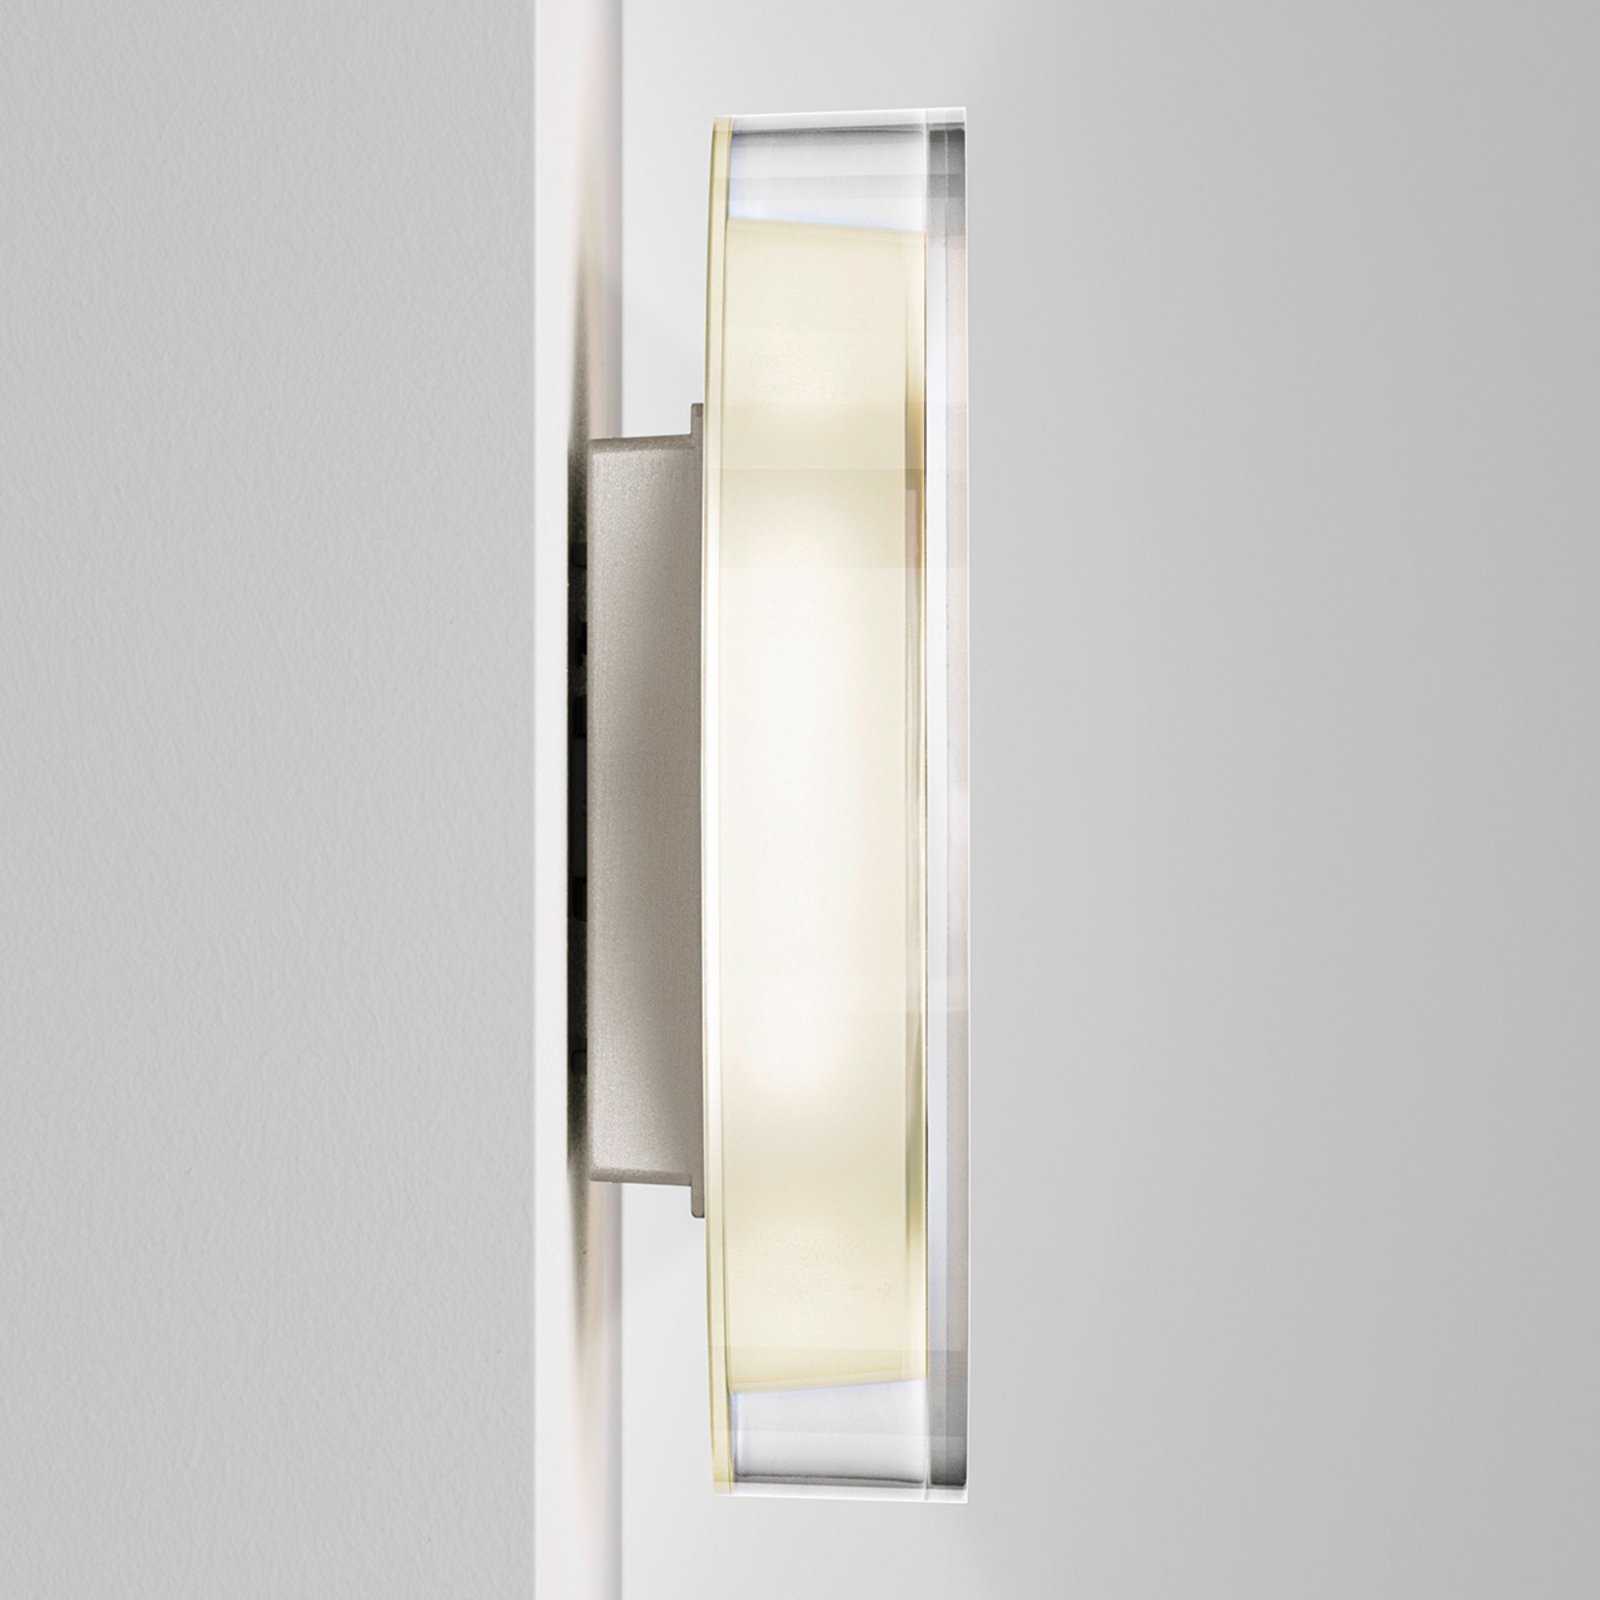 LED designer wall light Lid with opal glass